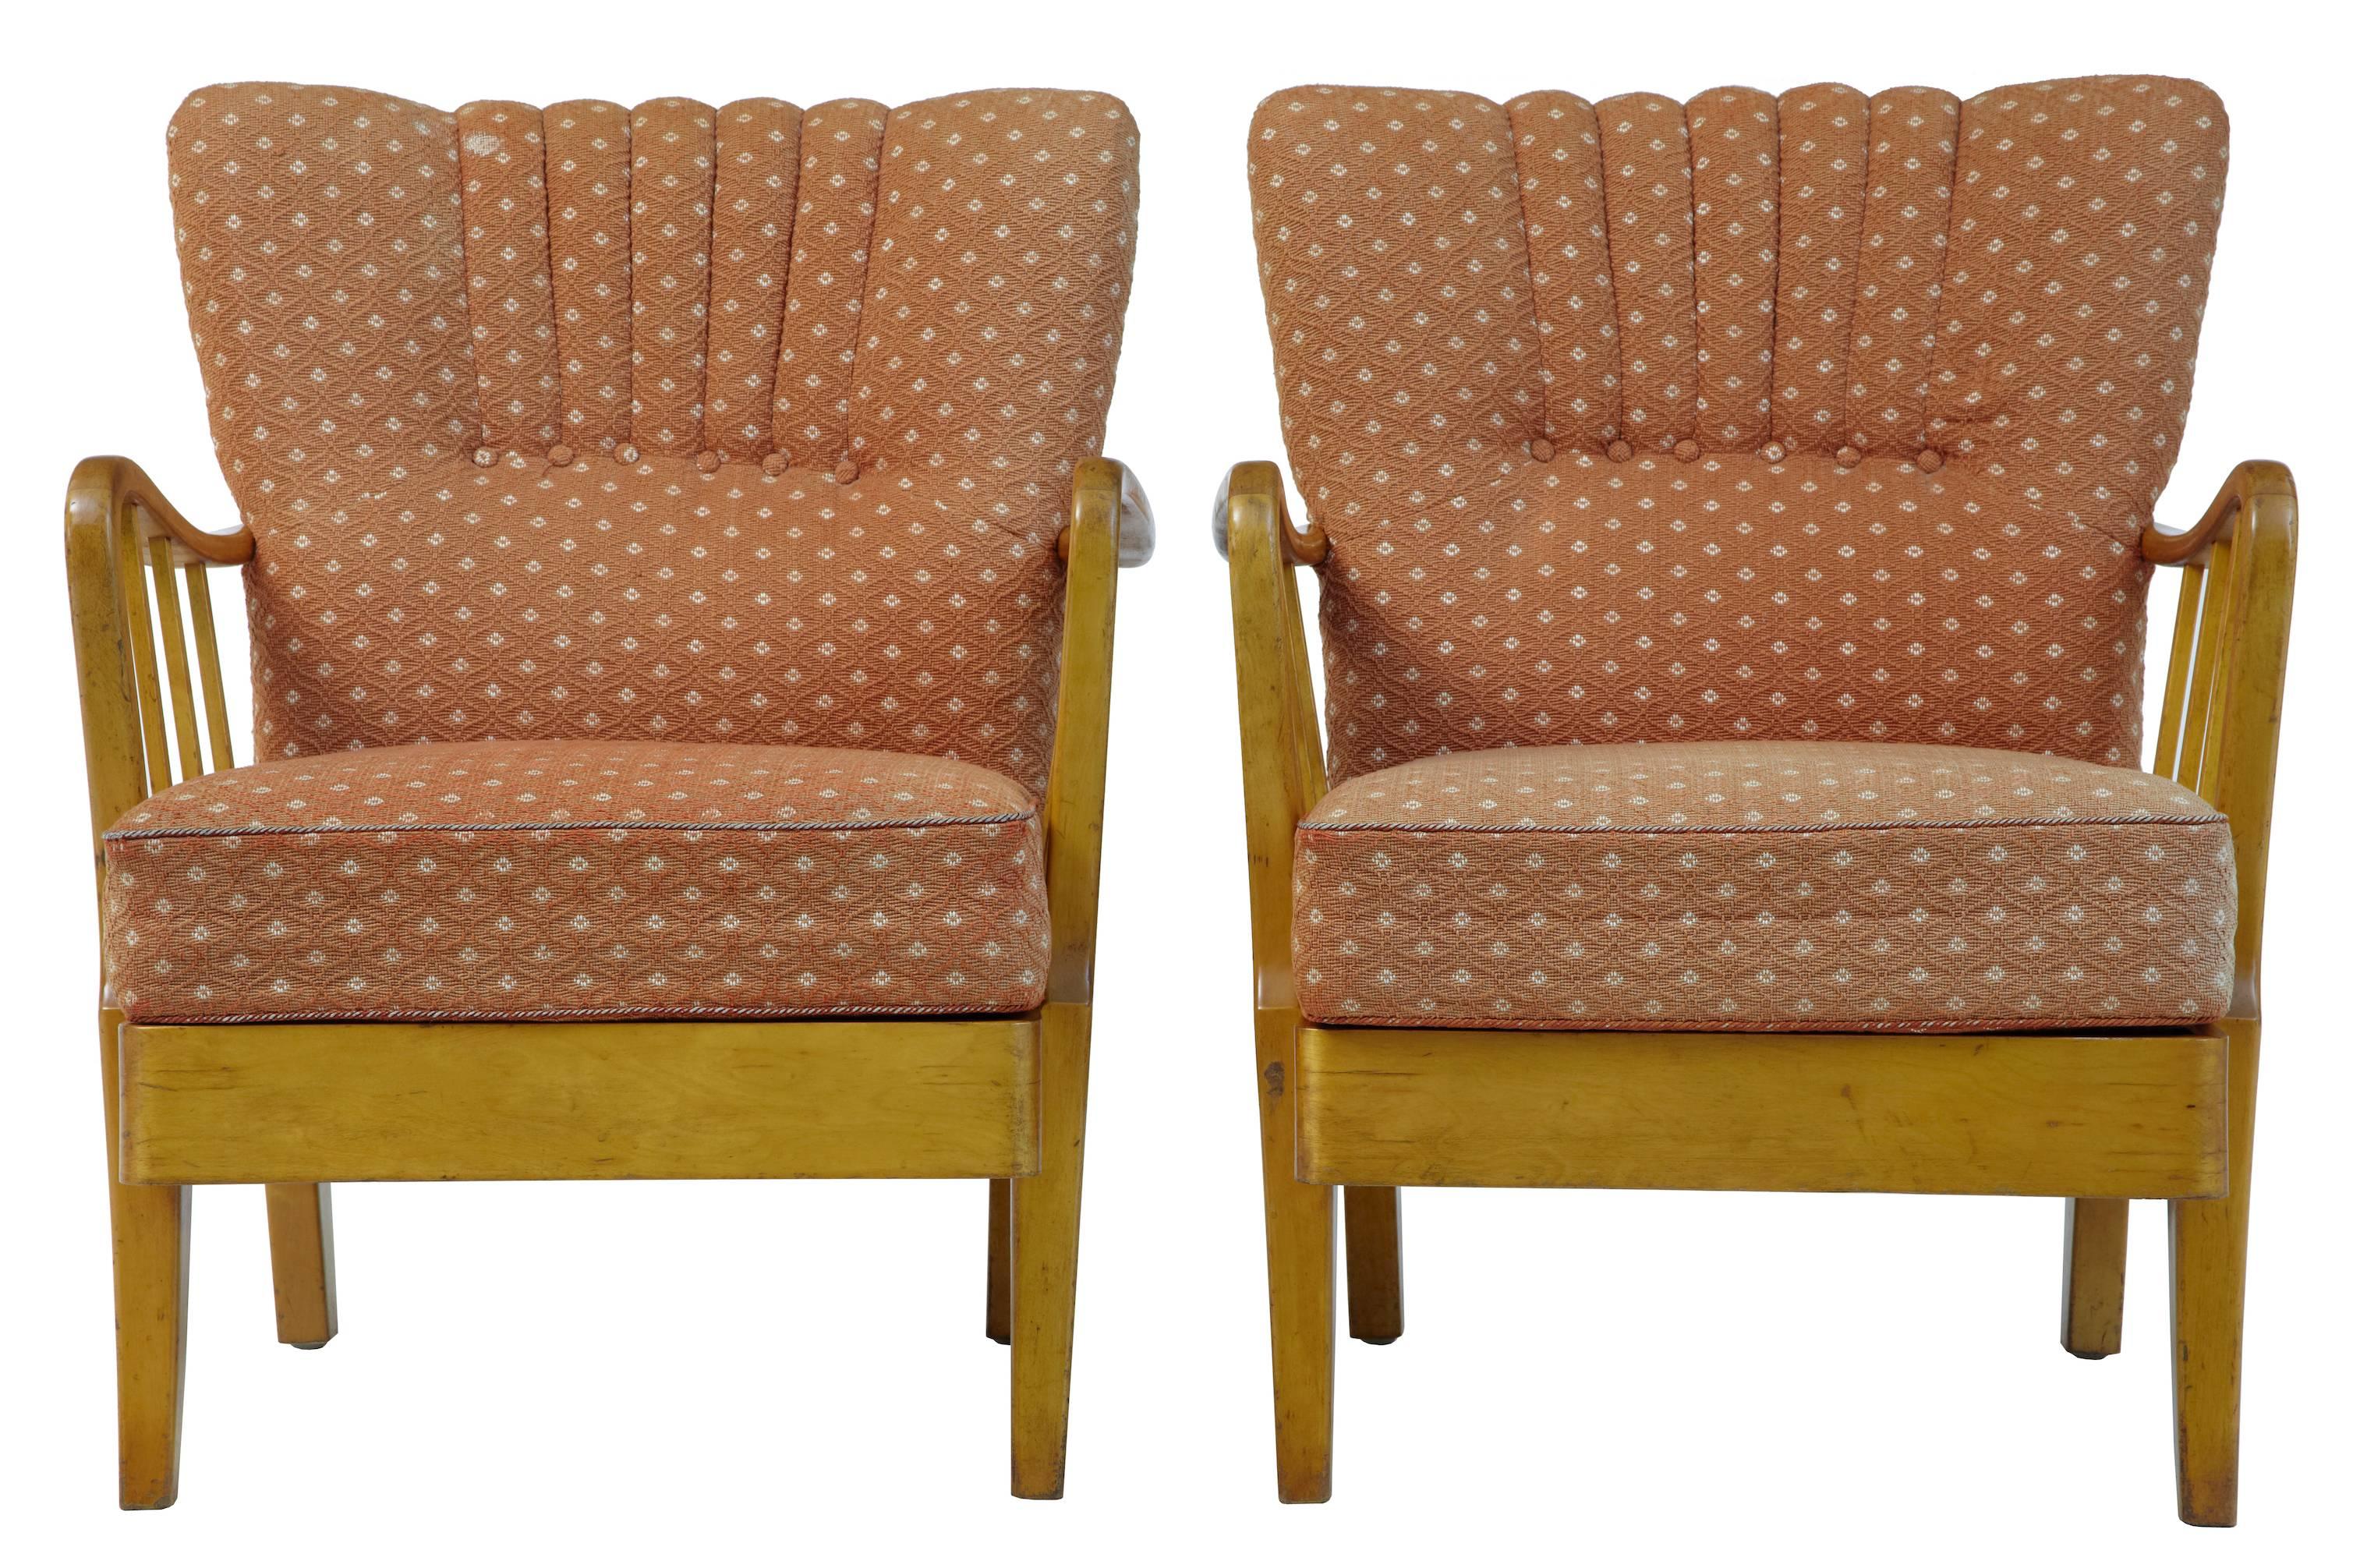 Pair of 1950s Swedish easy chairs.
Scalloped shaped backs.
Open spindle arms.
Original upholstery in good condition, but faded.

Measures: Height: 32 1/4